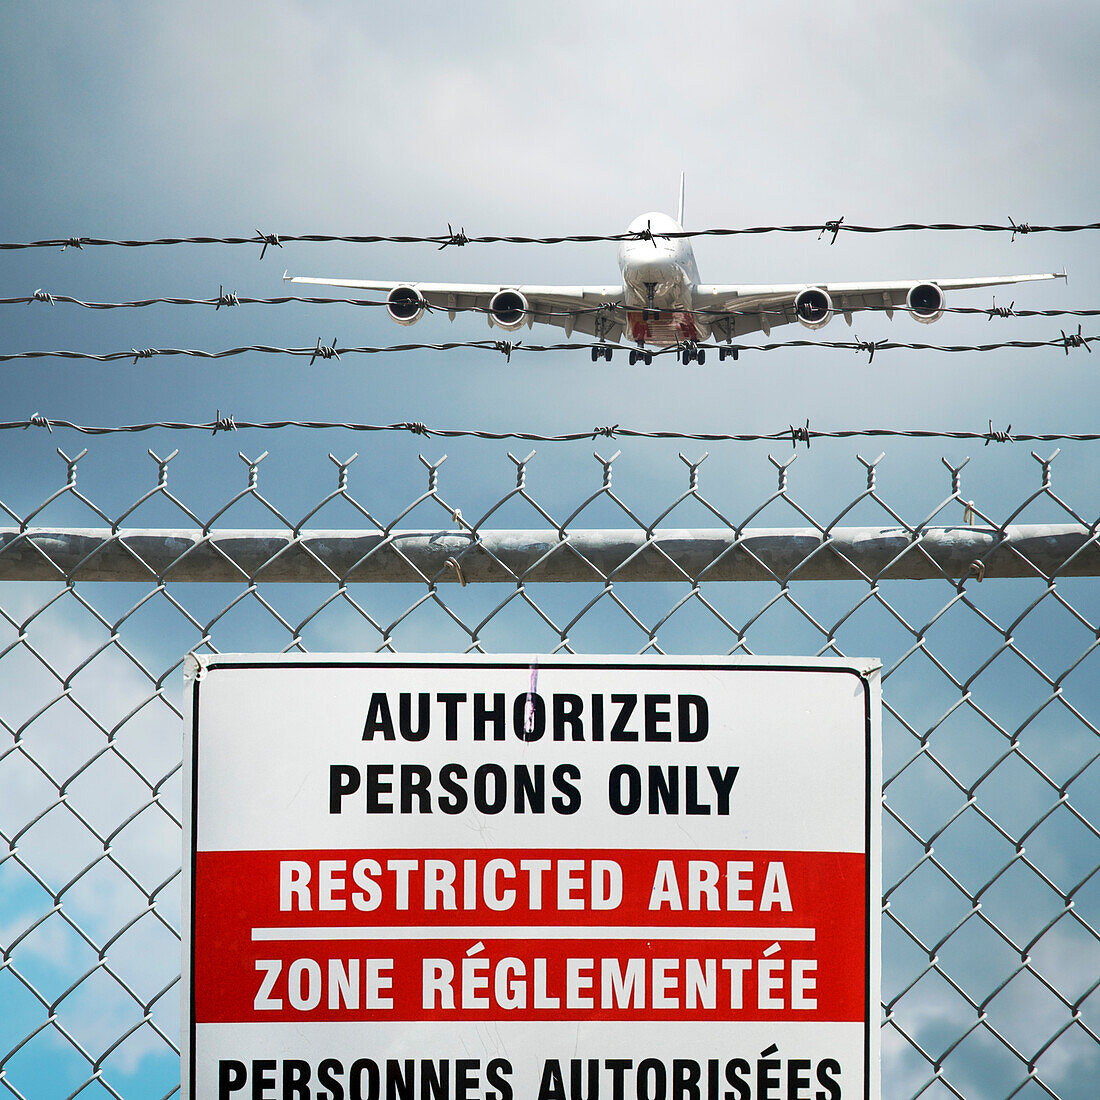 Jumbo Jet and Restricted Area Sign on Chain Link Fence with Barbed Wire, Pearson International Airport, Toronto, Ontario, Canada